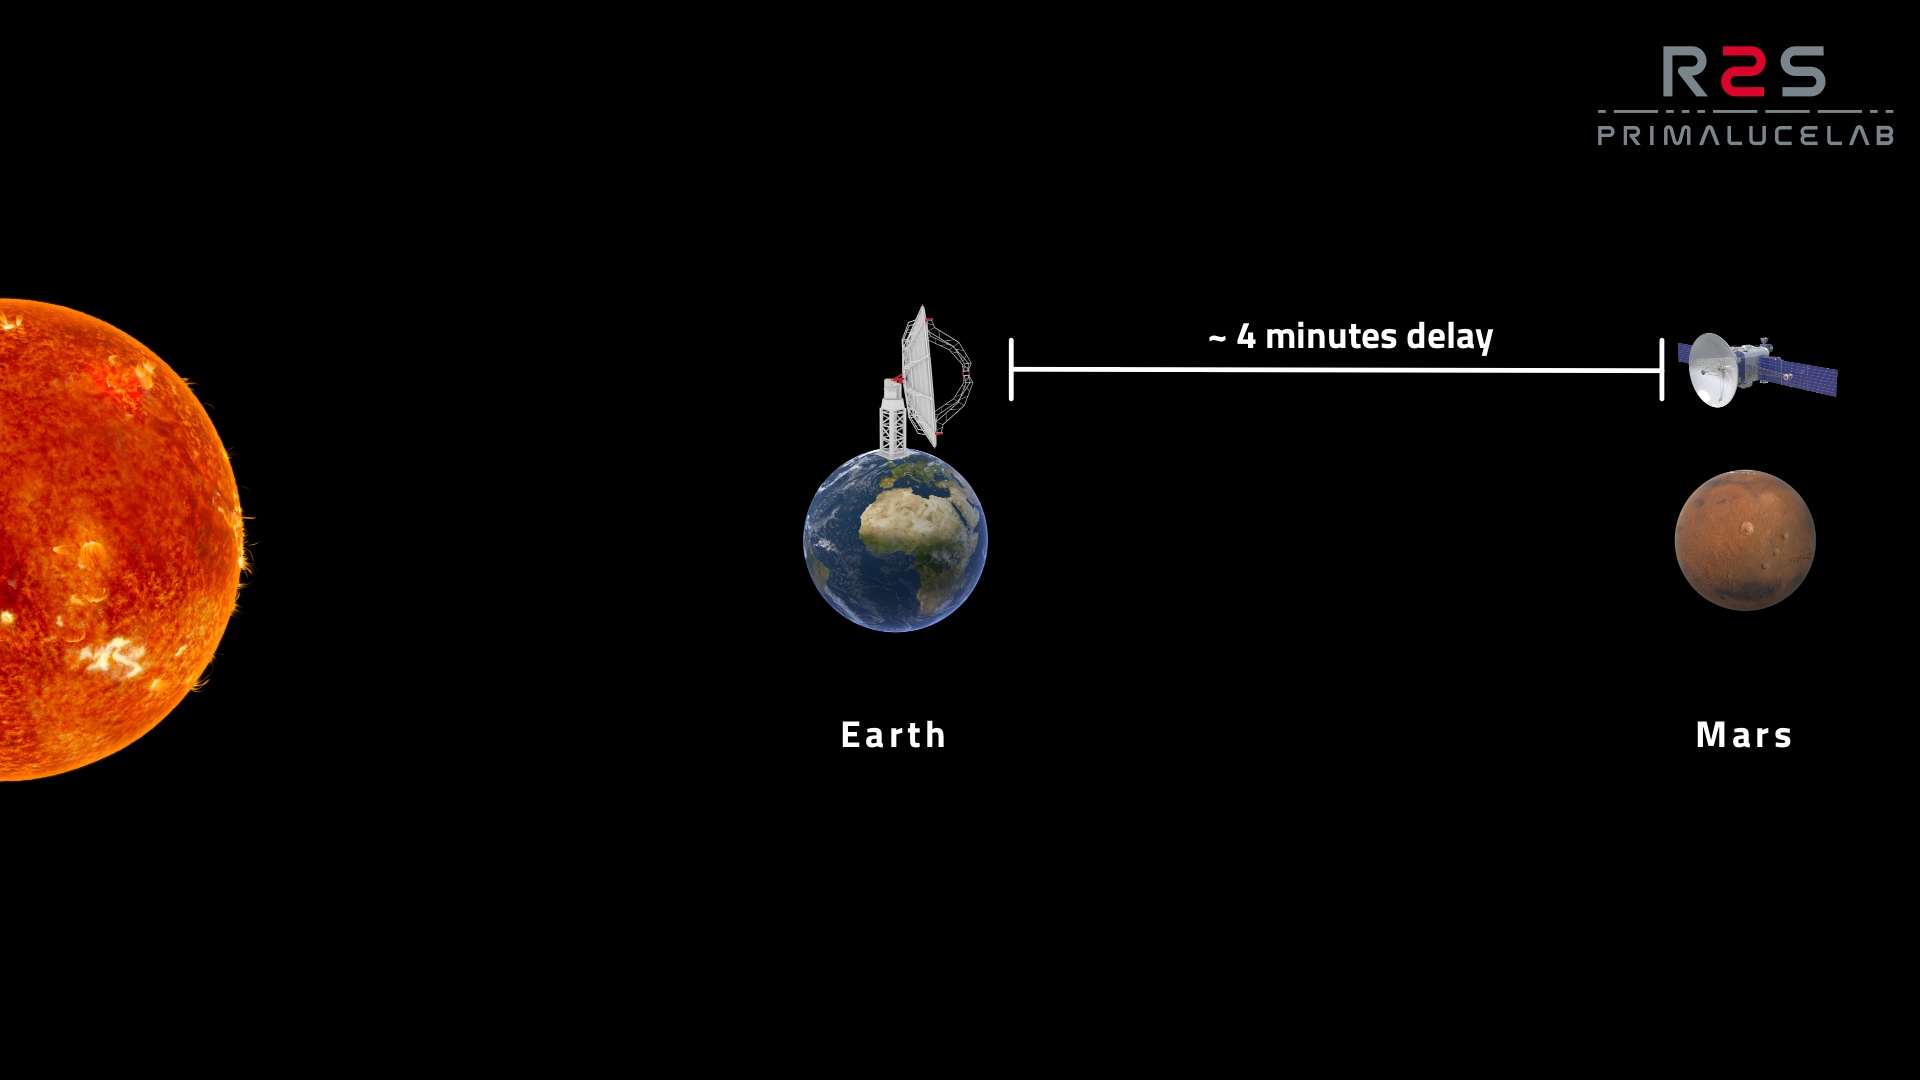 What is space communication: at the closest approach to Mars, a signal transmitted to the Earth will take around 4 minutes to arrive. Image not in scale.